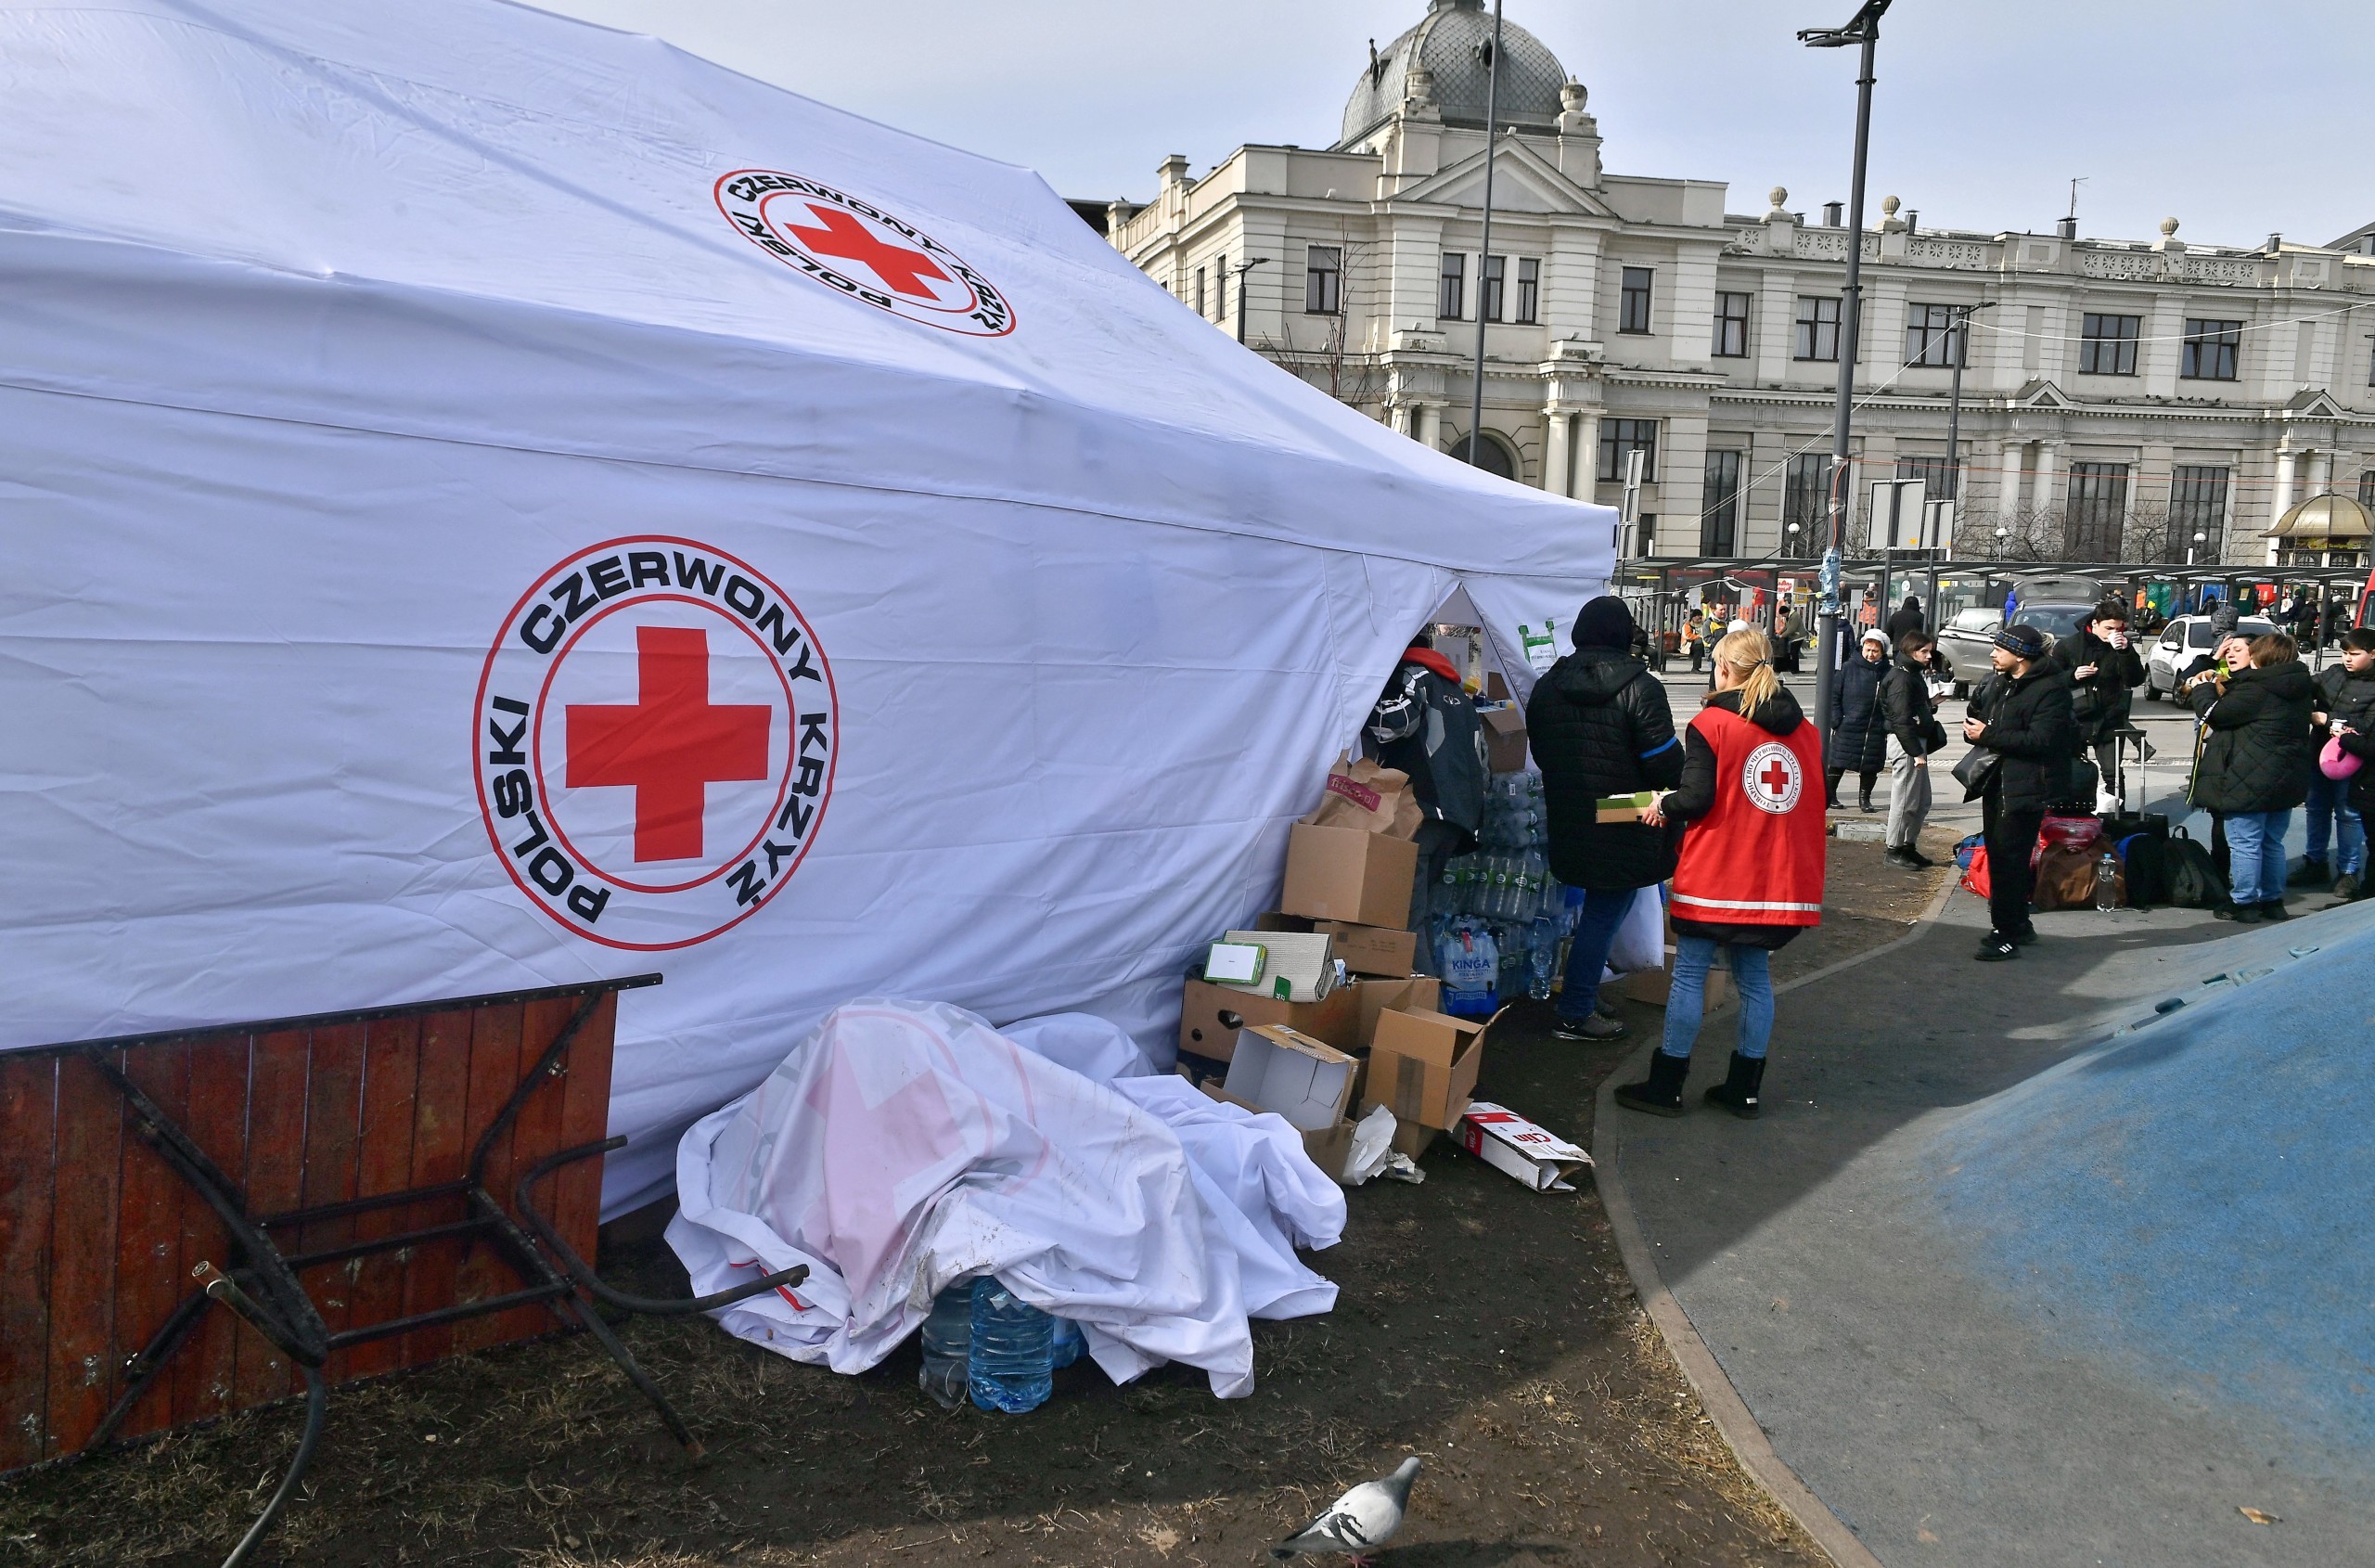 epa09820839 Polish Red Cross tent in front of the railway station in Lviv, western Ukraine, 12 March 2022 (issued 13 March 2022). Russian troops entered Ukraine on 24 February prompting the country's president to declare martial law and over 2.5 million people to flee the country, according to UNHCR figures.  EPA/ANDRZEJ LANGE POLAND OUT